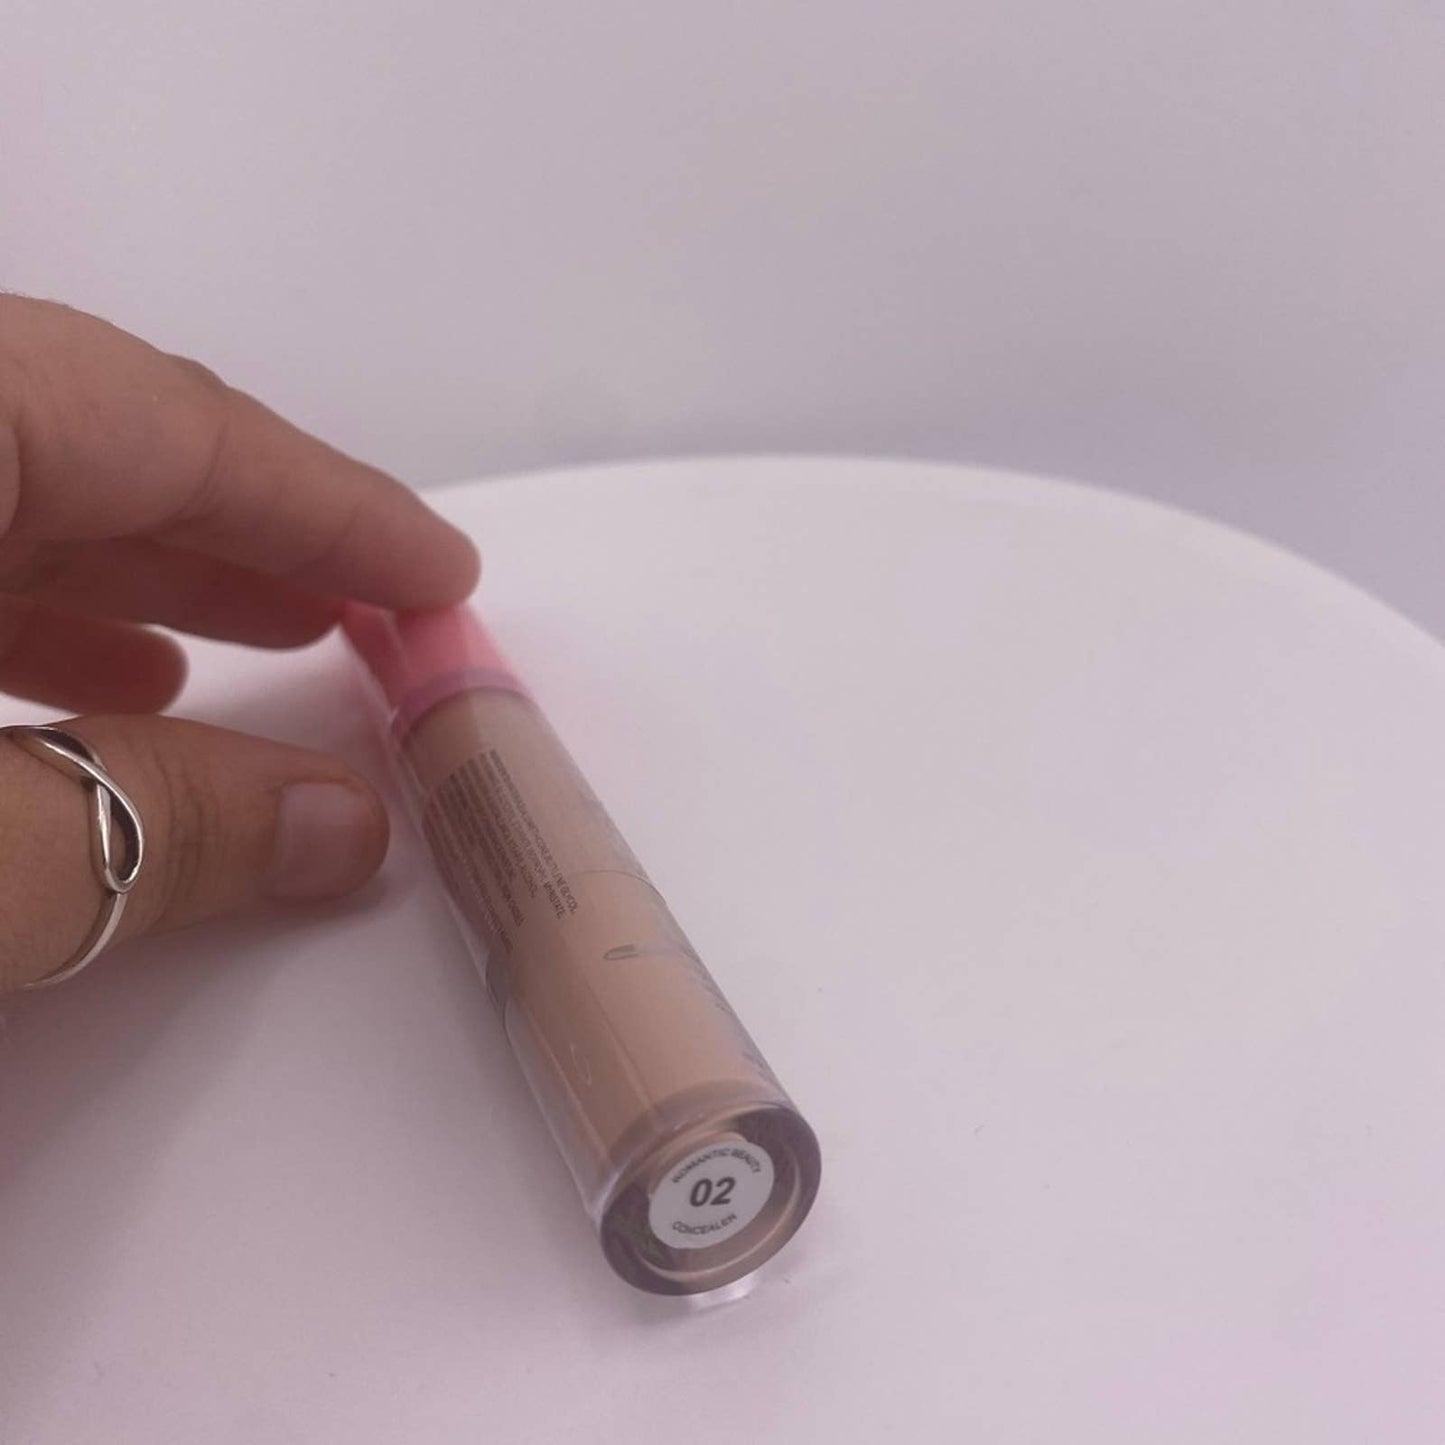 Romantic Beauty Concealer with Aloe Vera and Hyaluronic Acid